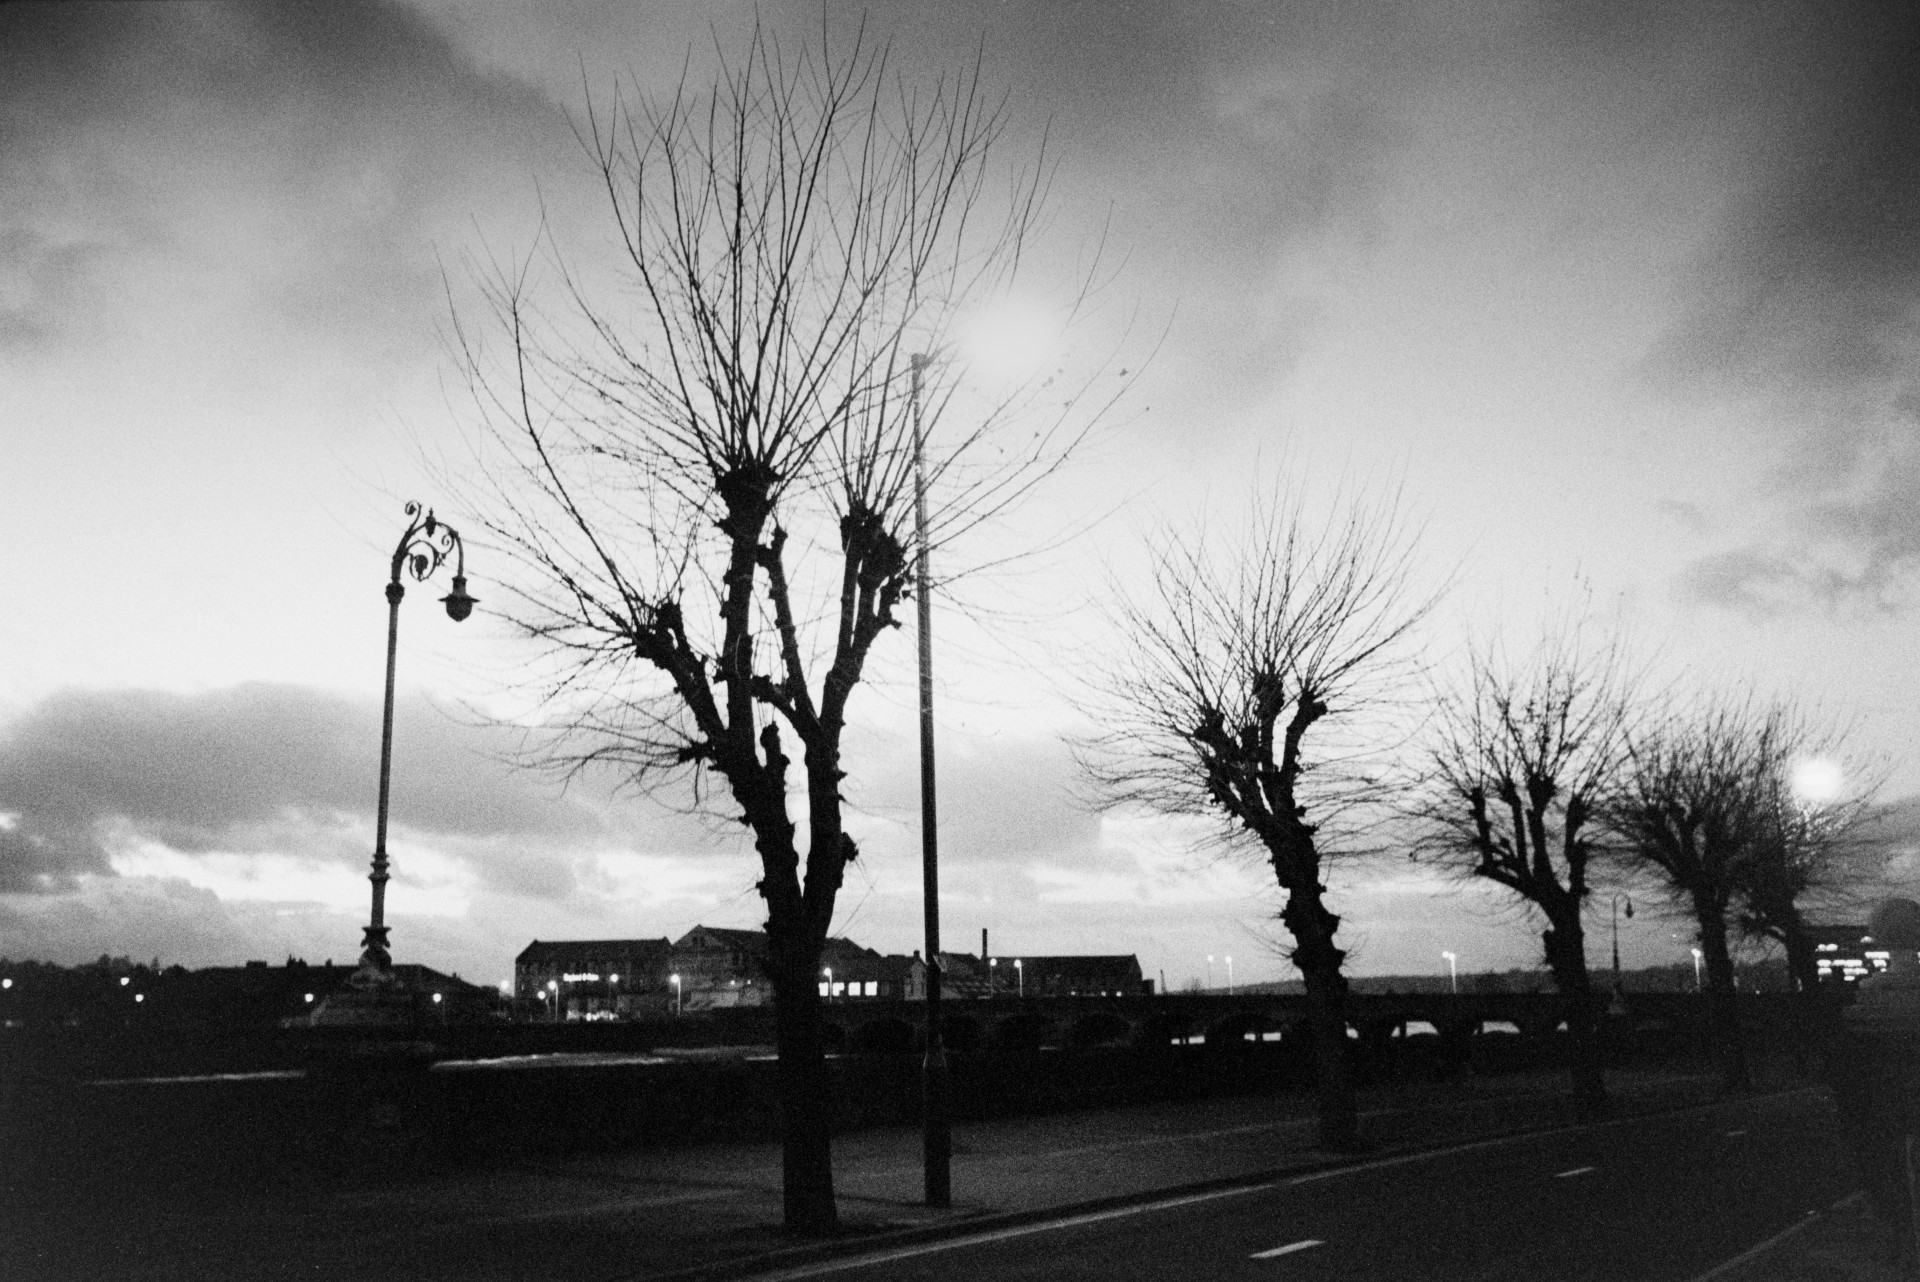 Trees and a lamppost silhouetted against a cloudy sky. Buildings can be seen in the background.